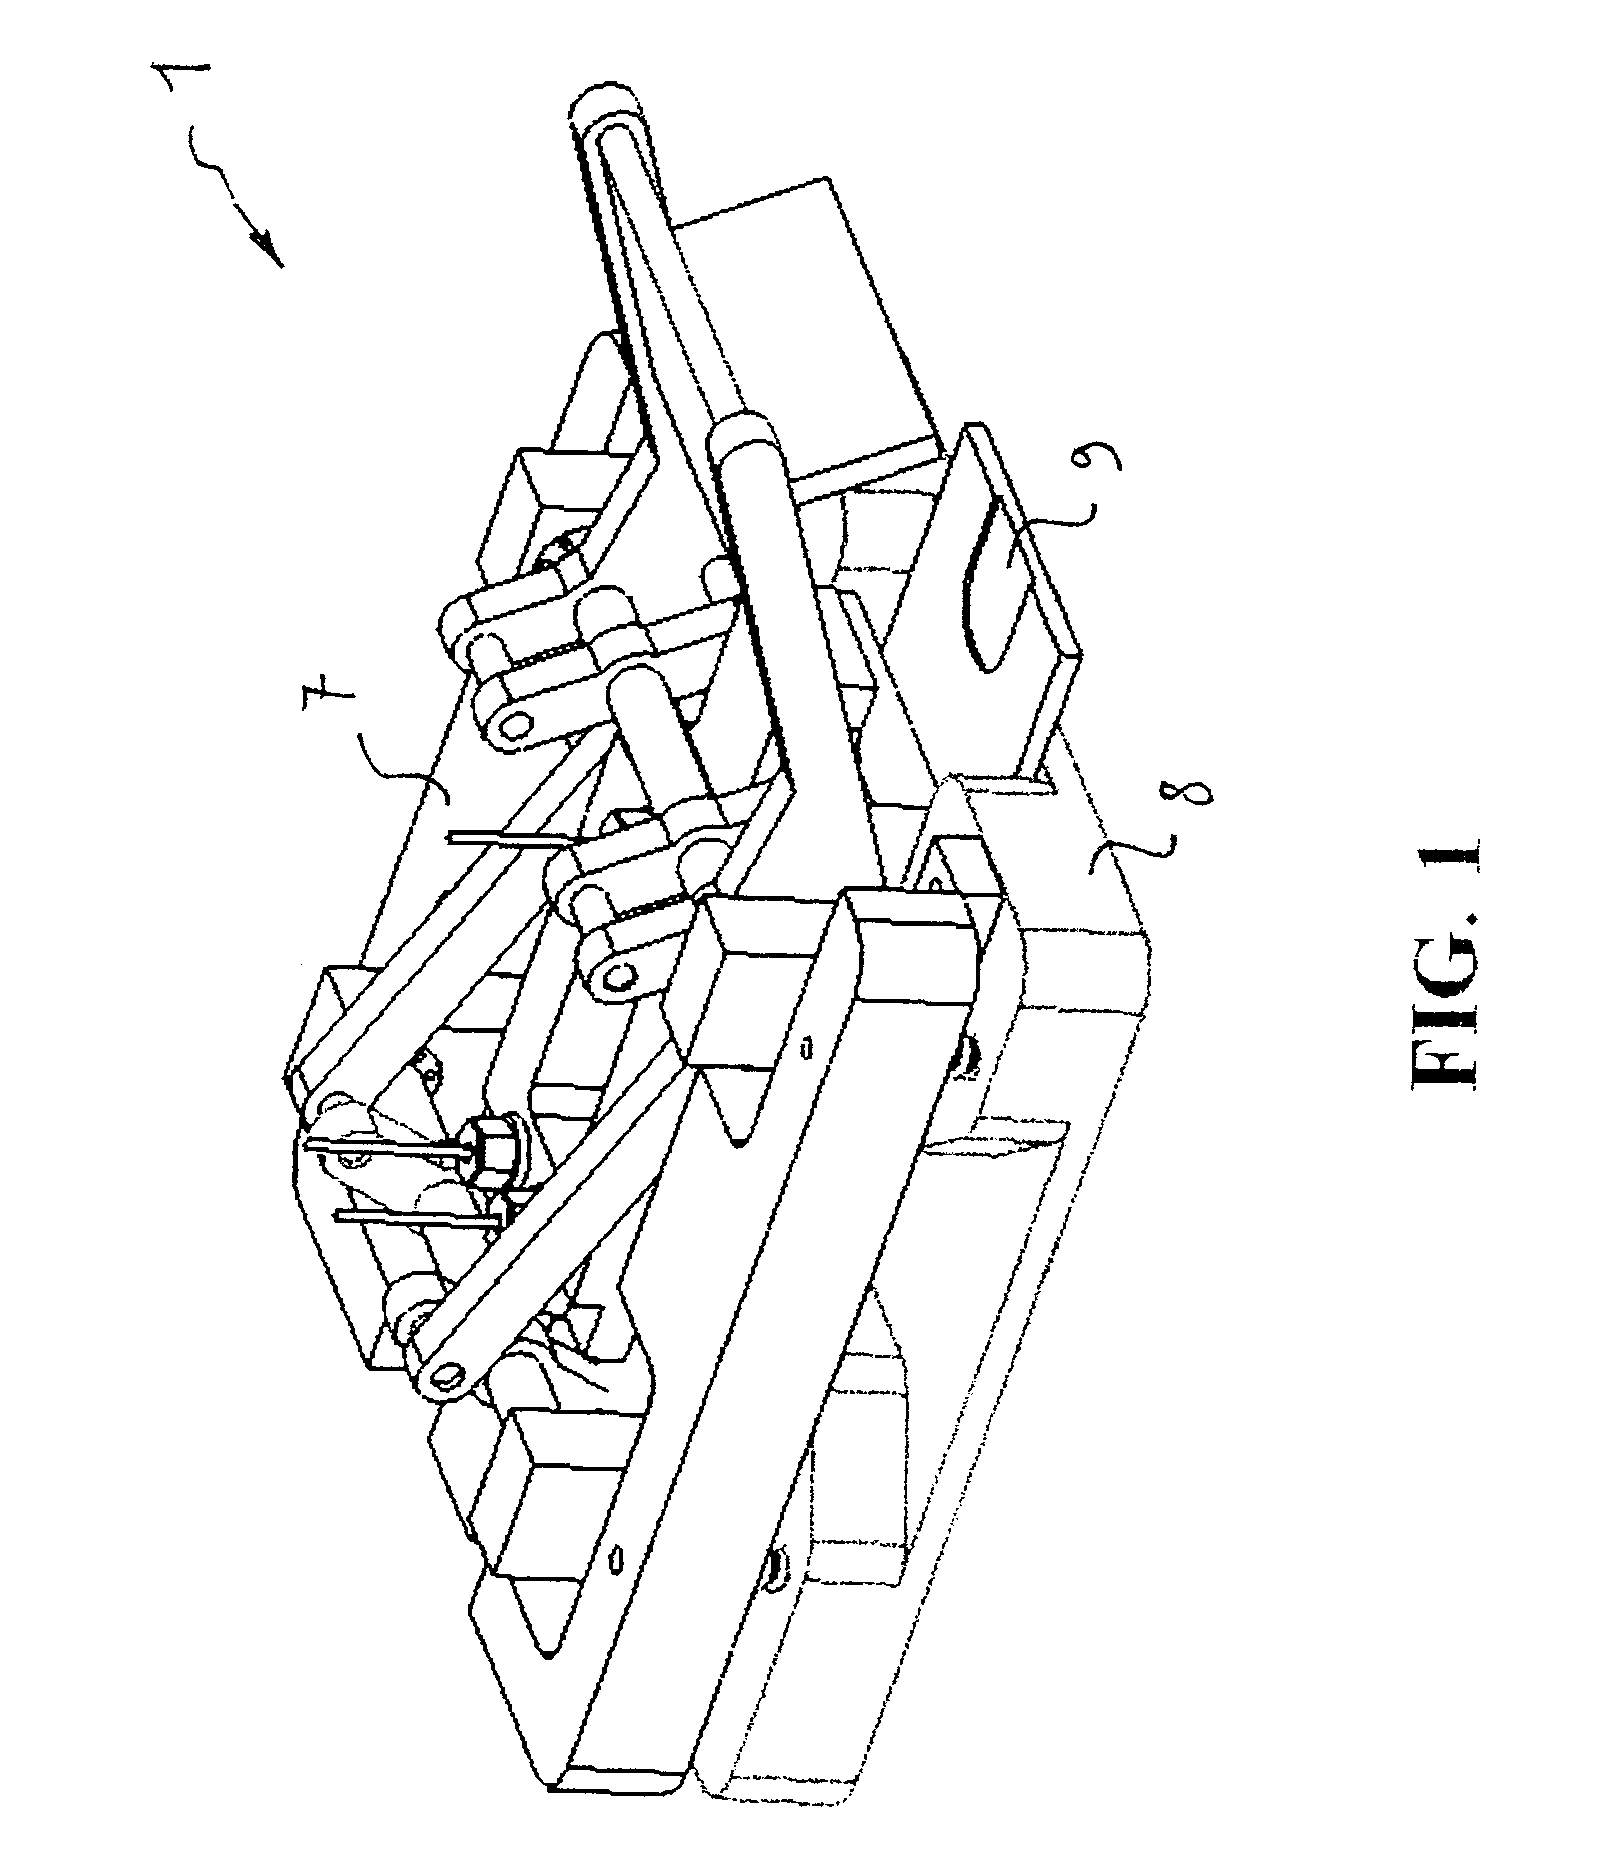 Device and Method for Fluidic Coupling of Fluidic Conduits to a Microfludic Chip, and Uncoupling Thereof